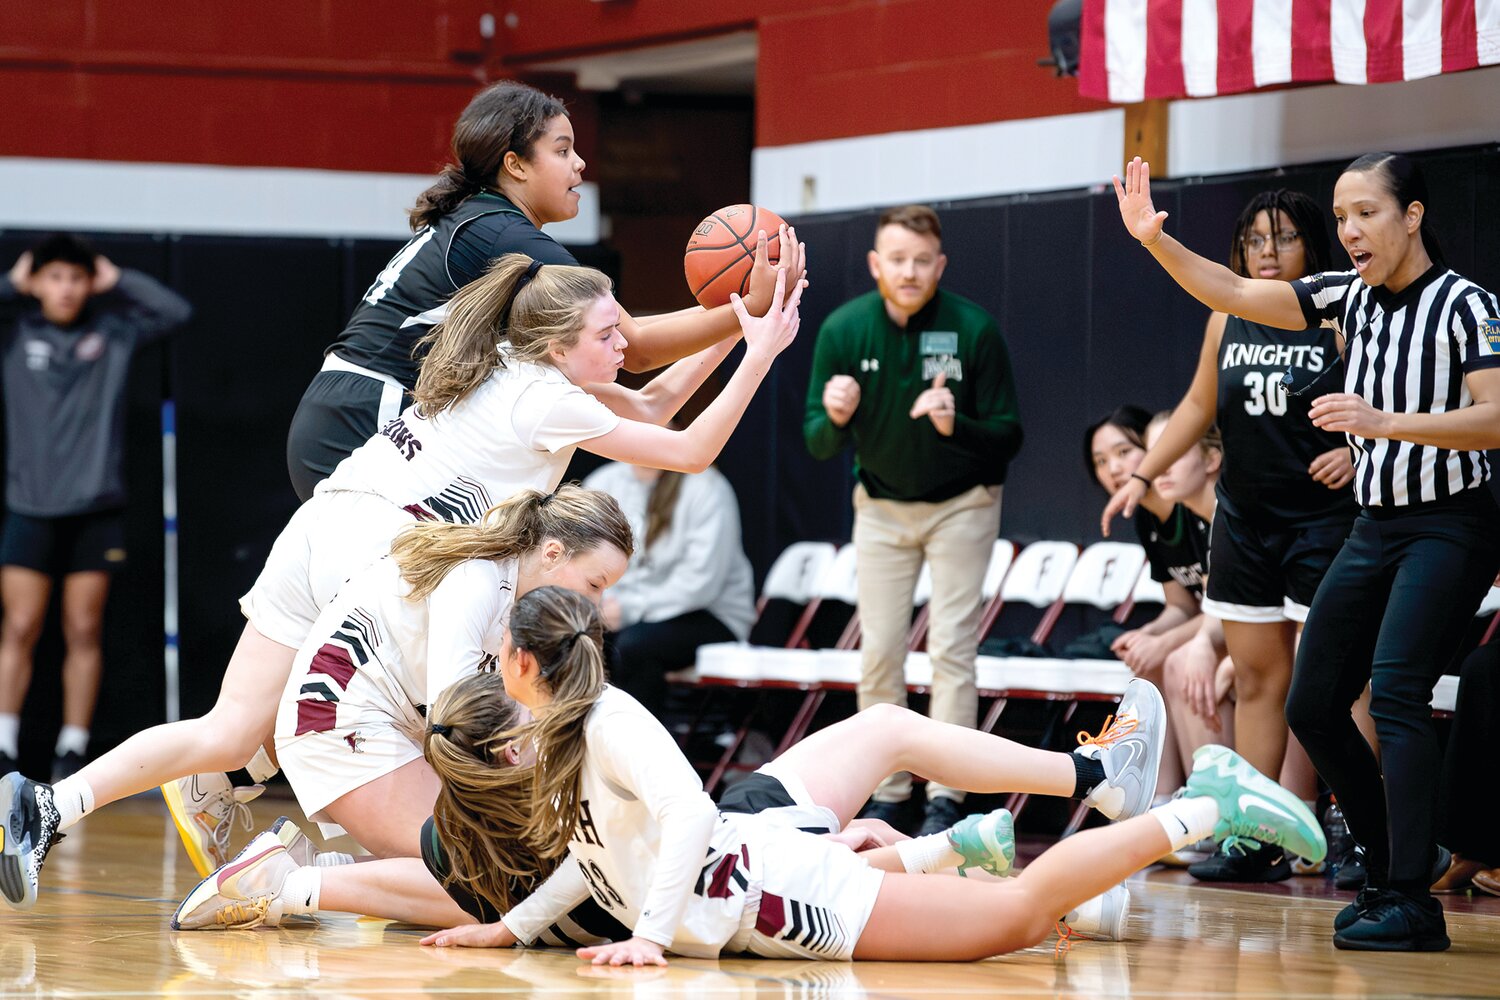 Faith Christian’s Brigid Garlick tries to secure a loose ball with seconds left in the game and Faith down by two points.